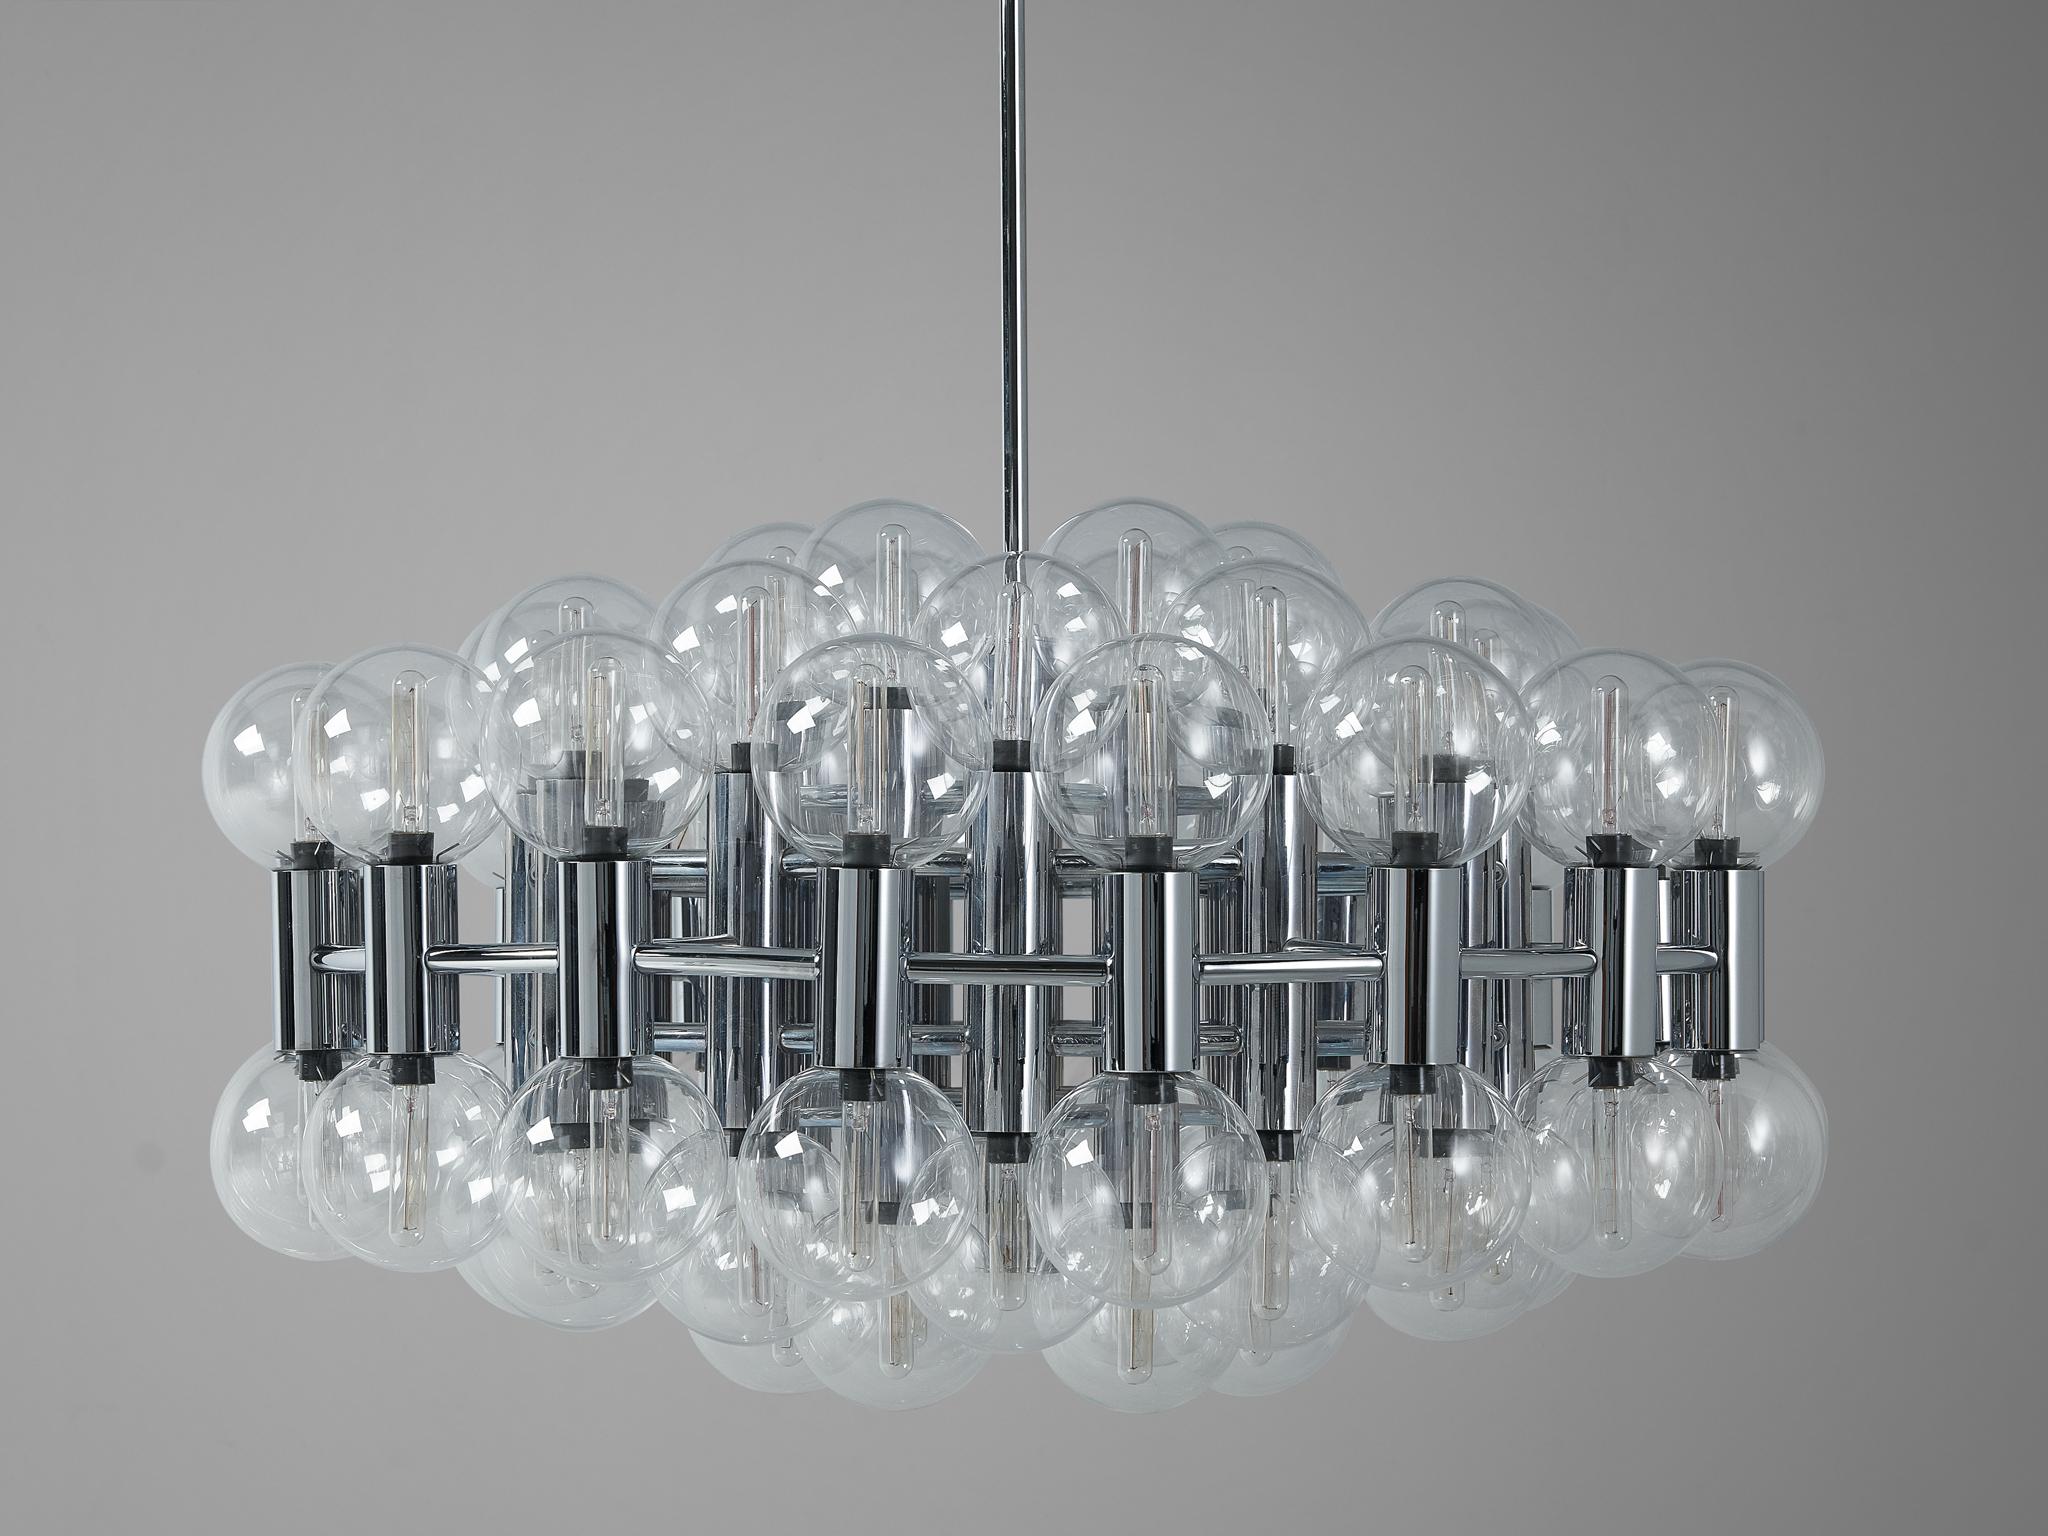  Motoko Ishii for Staff Leuchten Large Chandelier in Chrome with 72 Glass Orbs For Sale 6